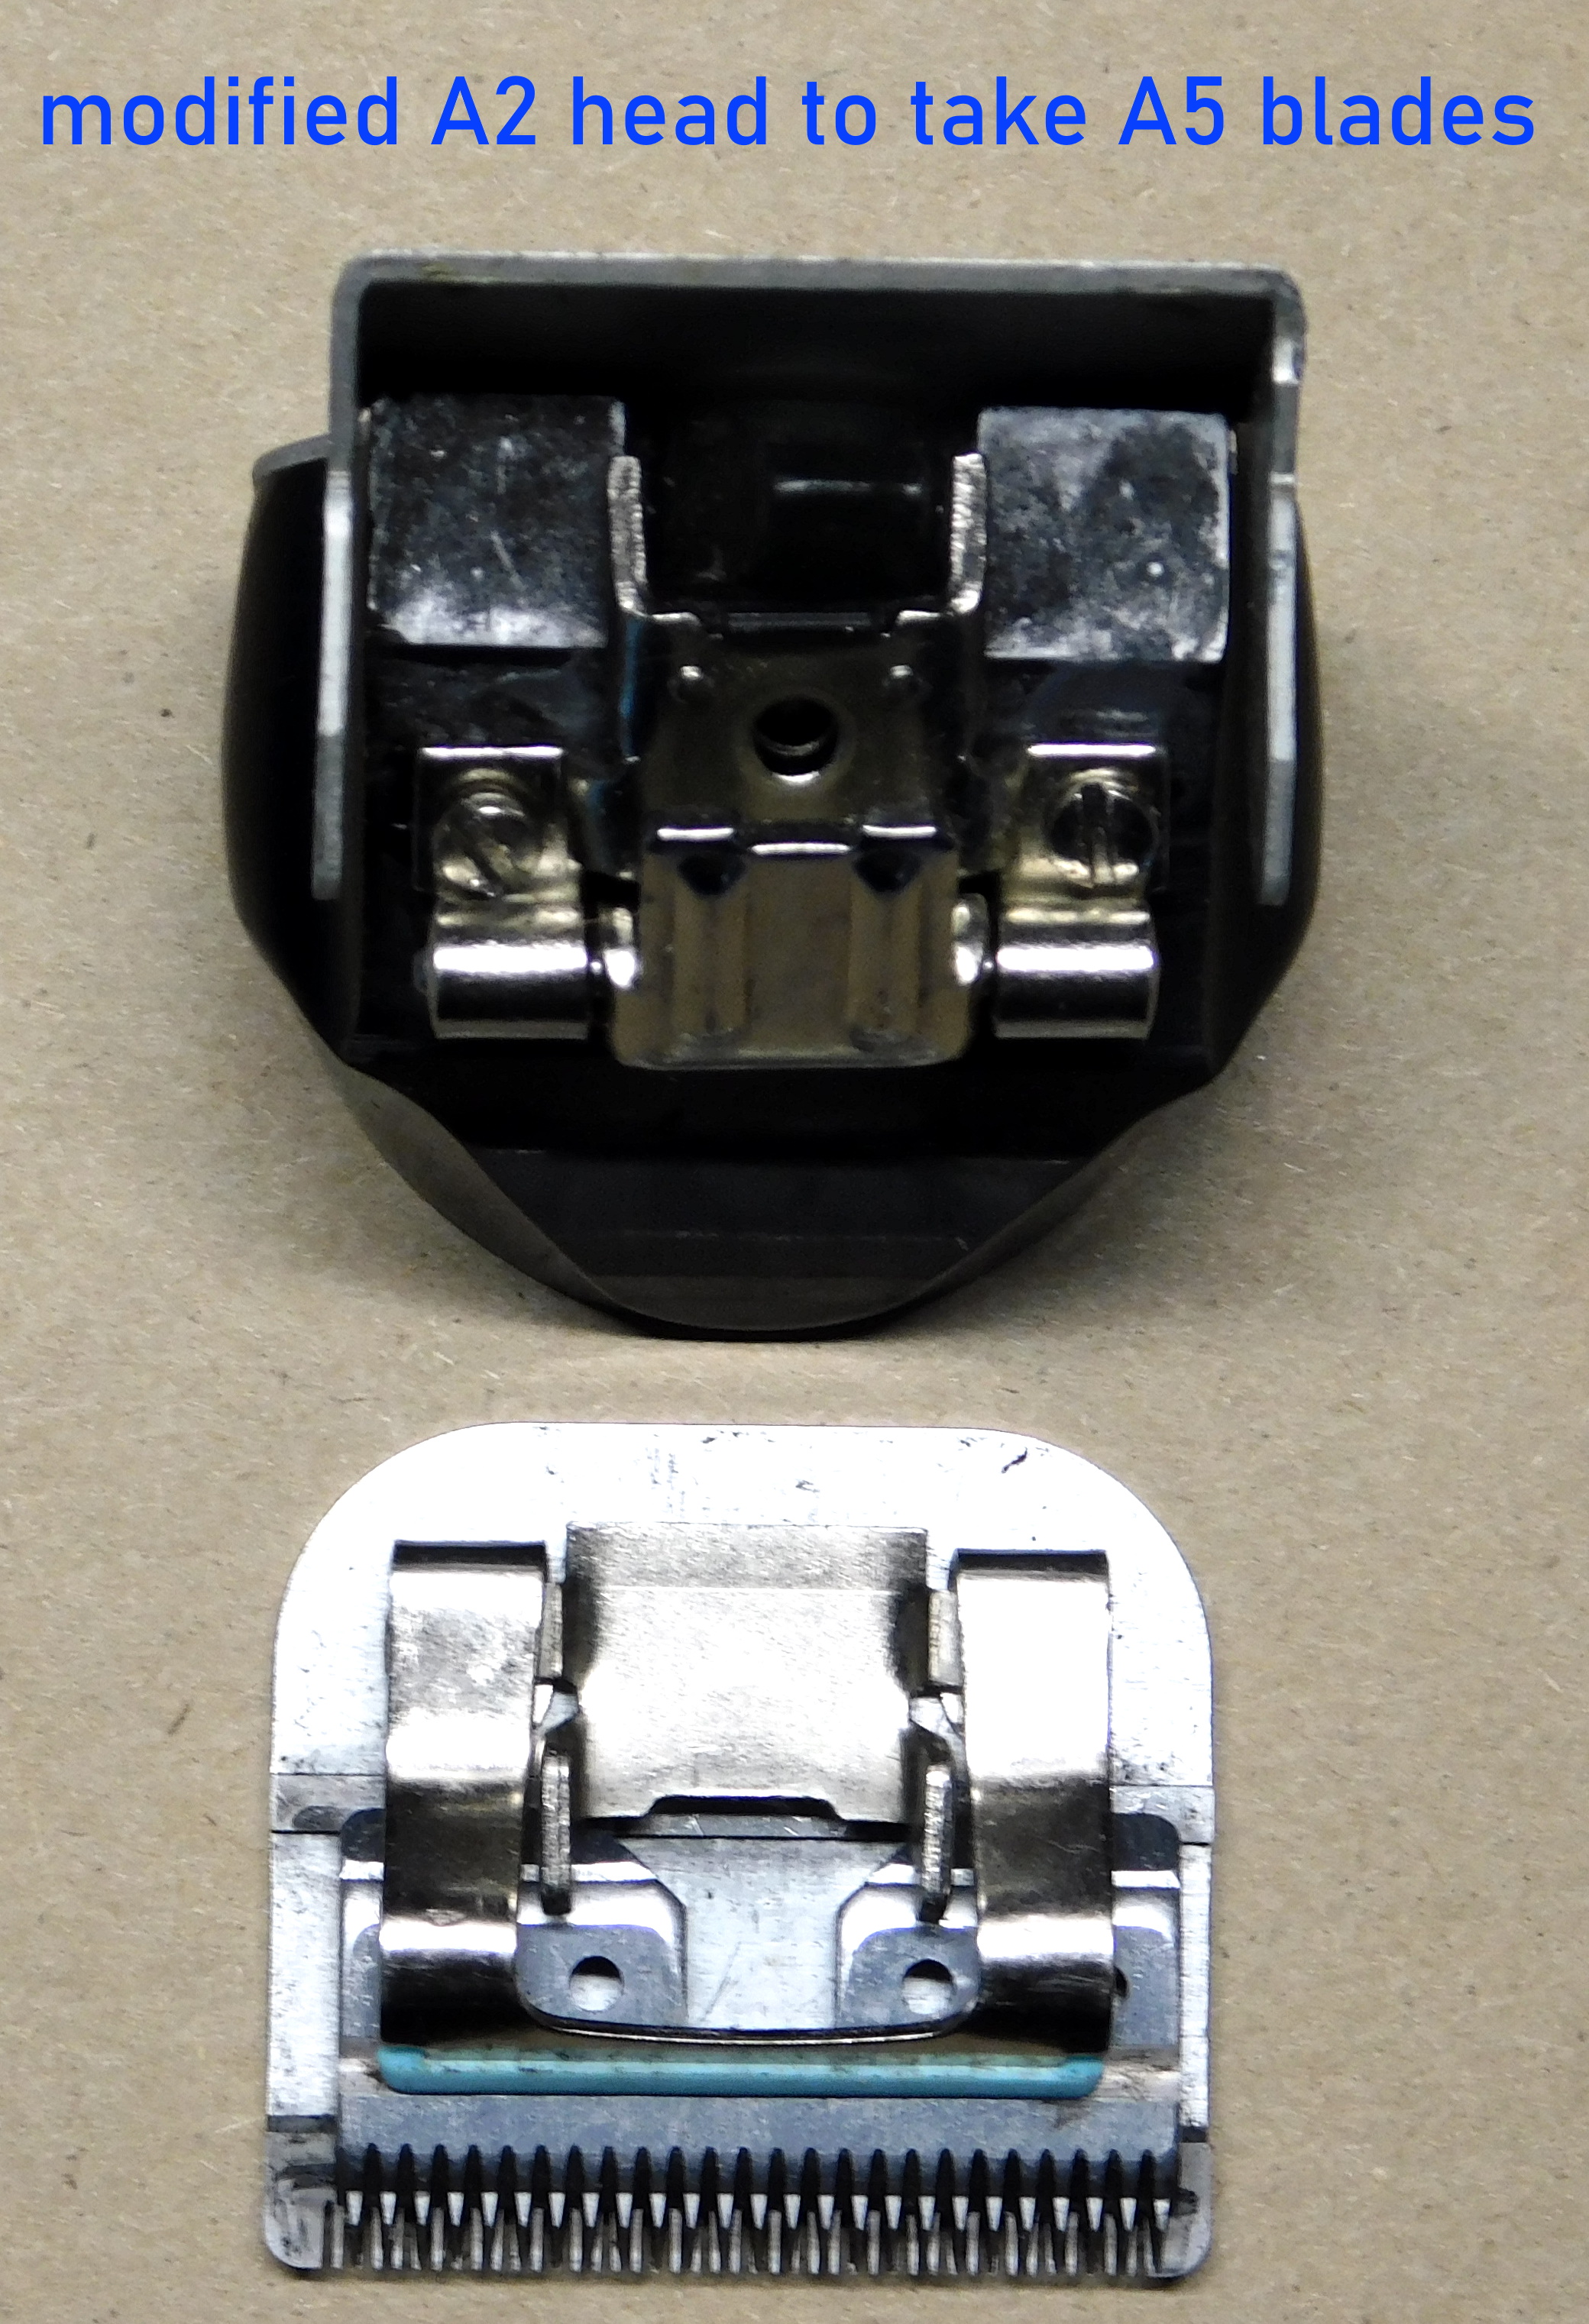 Picture showing a A2 clipper head modified to take A5 type blades